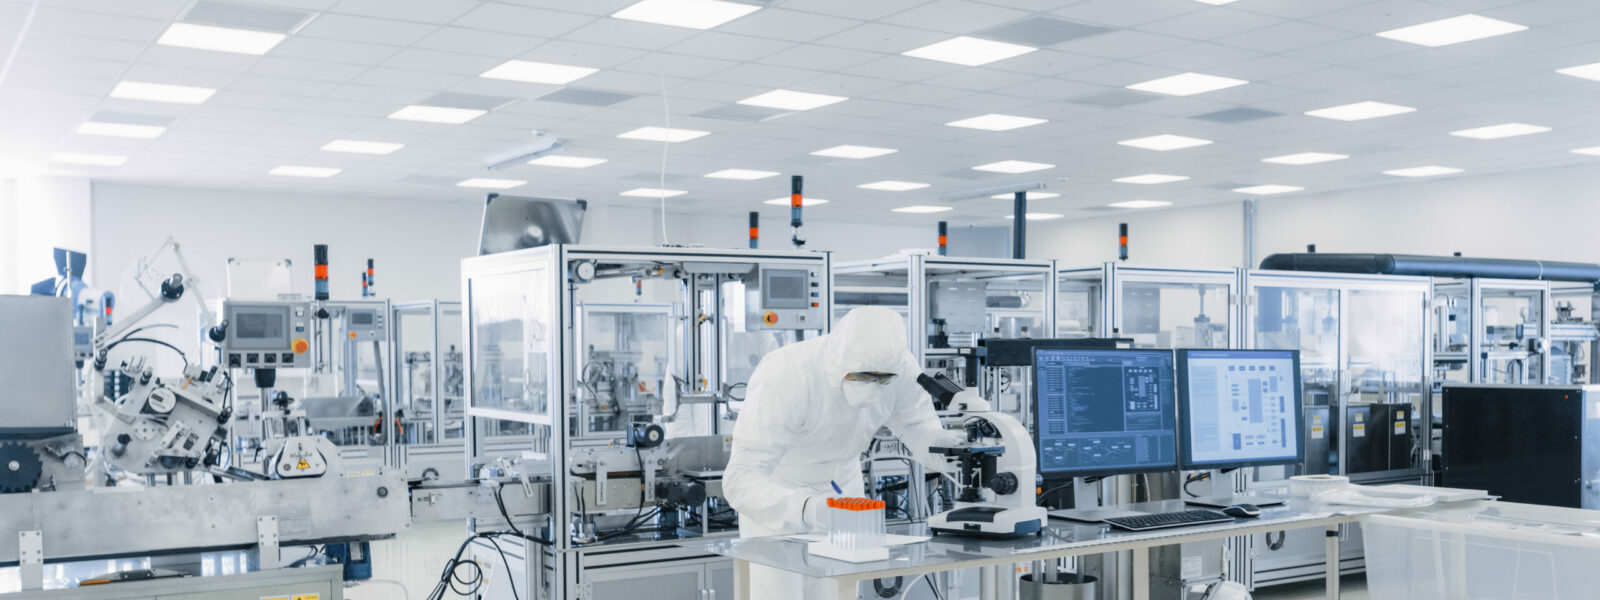 Shot of Sterile Pharmaceutical Manufacturing Laboratory where Scientists in Protective Coverall’s Do Research, Quality Control and Work on the Discovery of new Medicine.